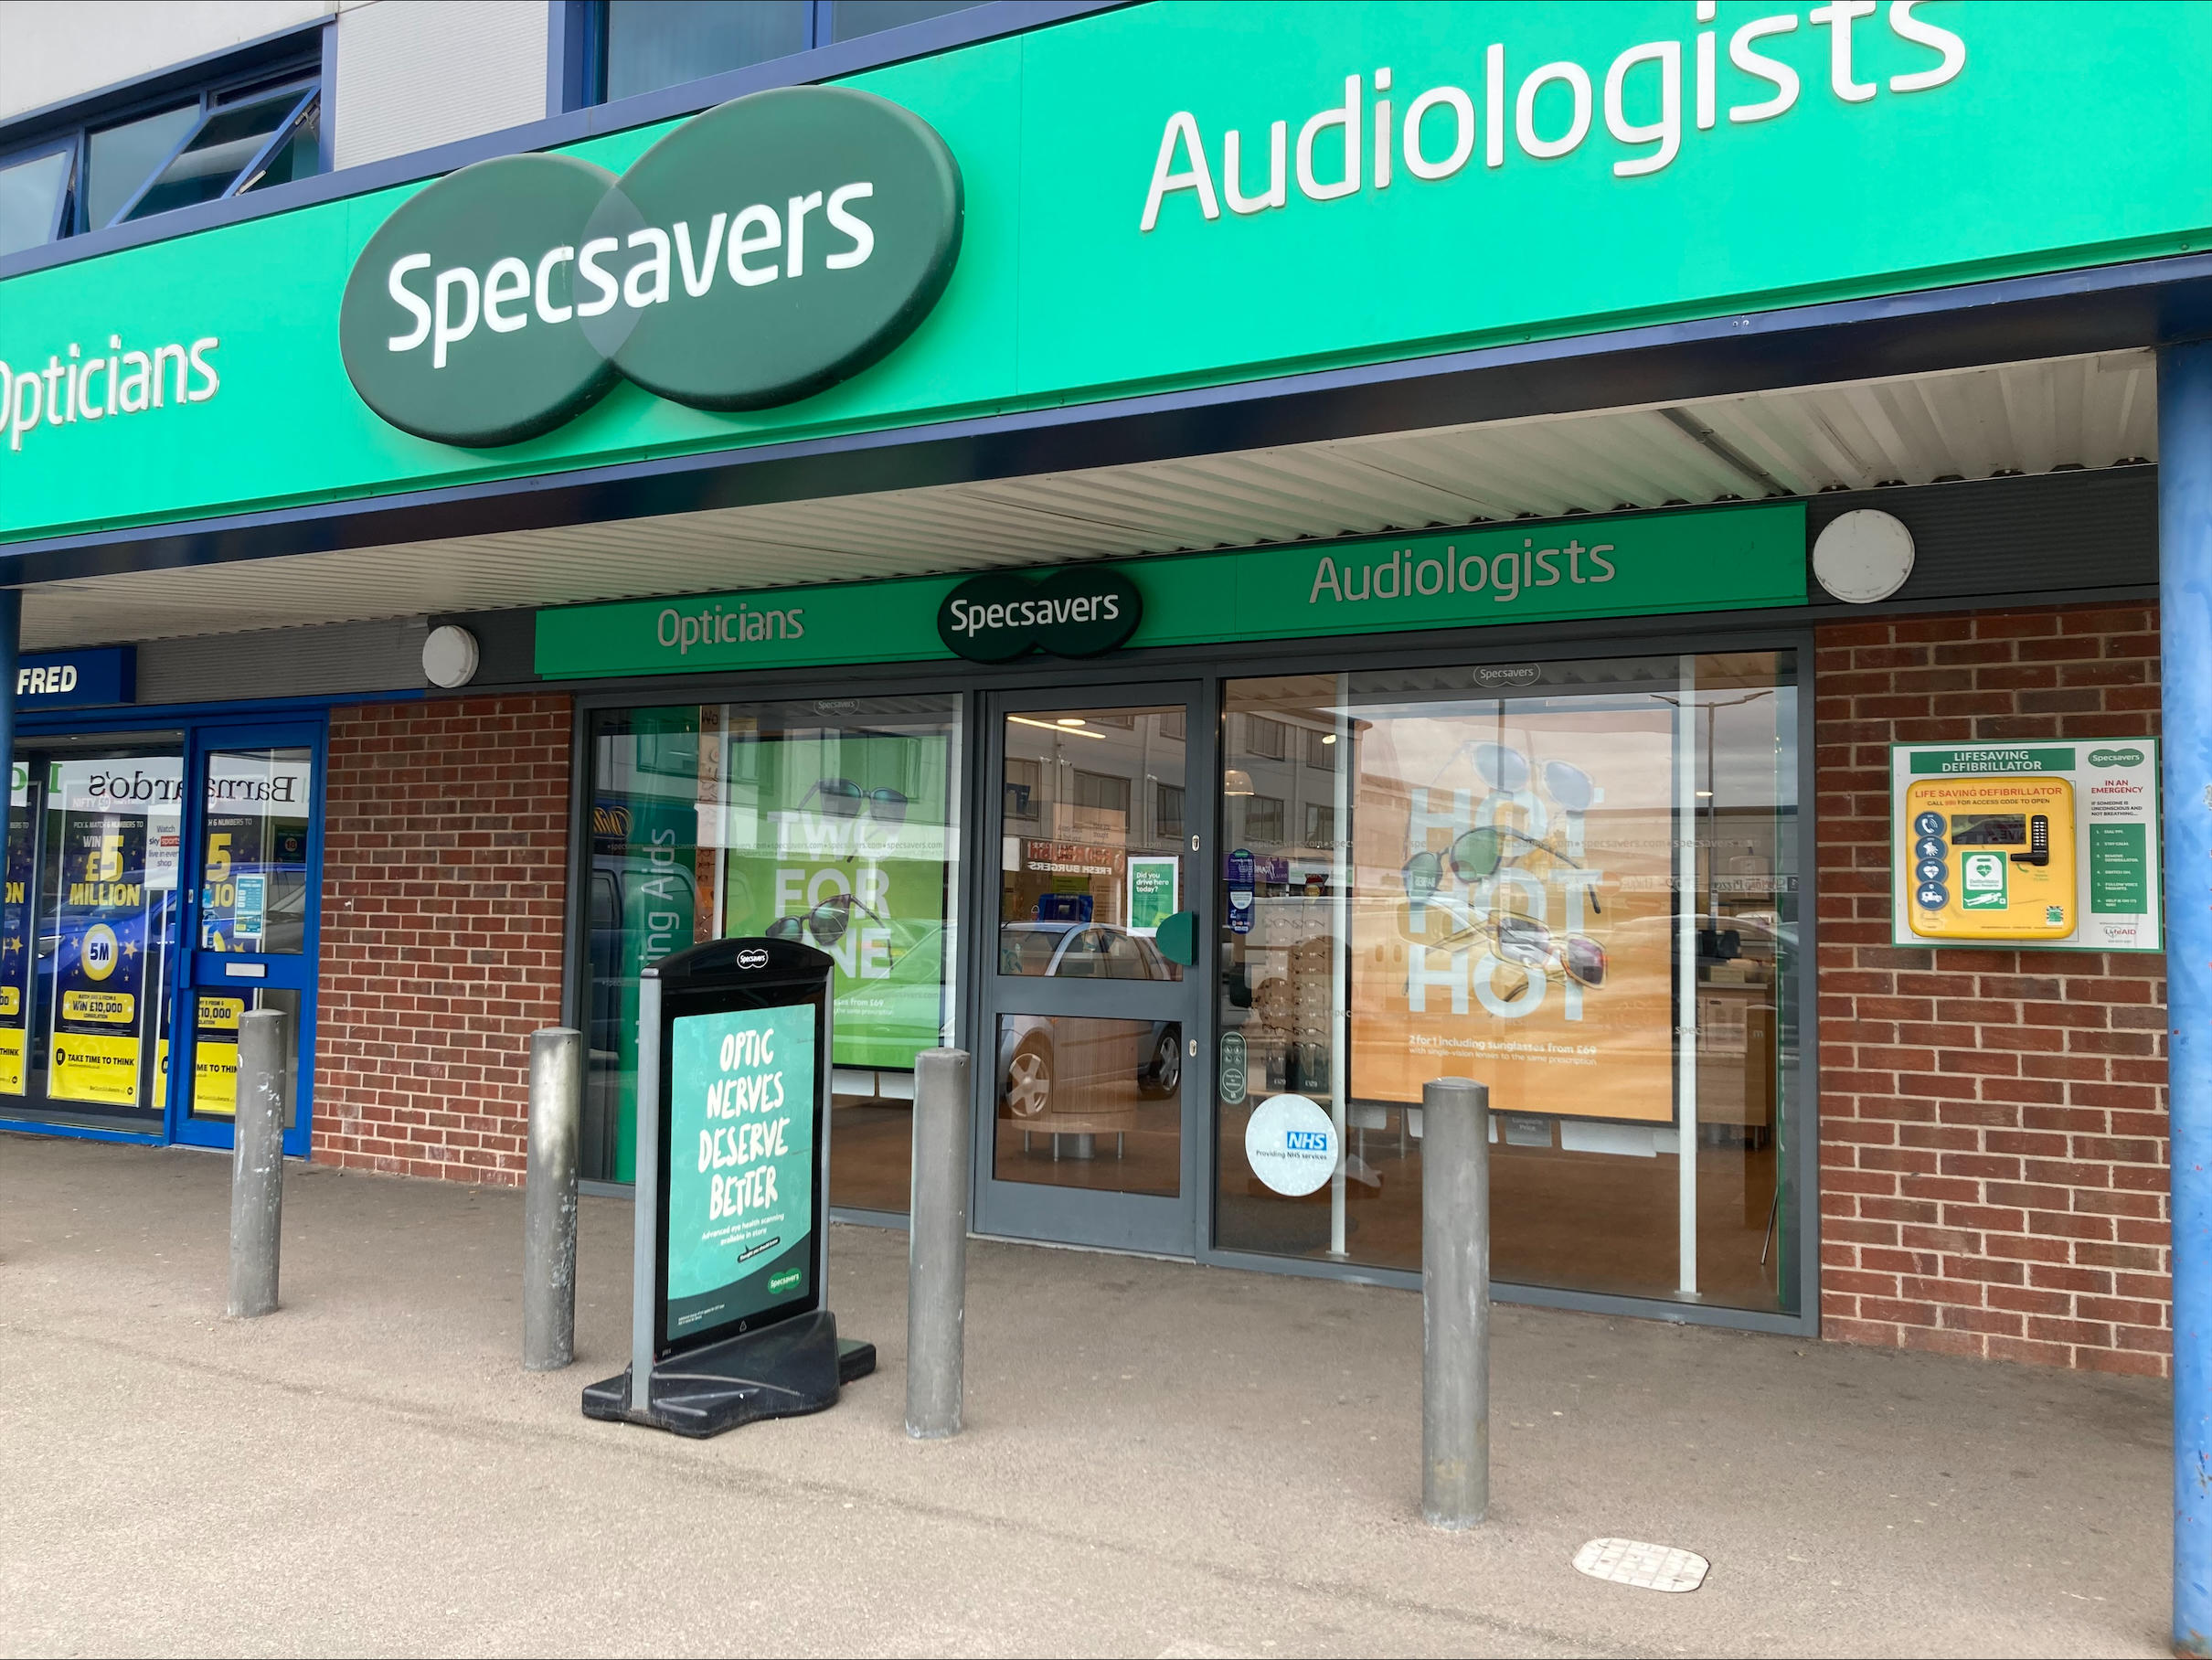 Specsavers Opticians and Audiologists - Armthorpe Specsavers Opticians and Audiologists - Armthorpe Doncaster 01302 302327